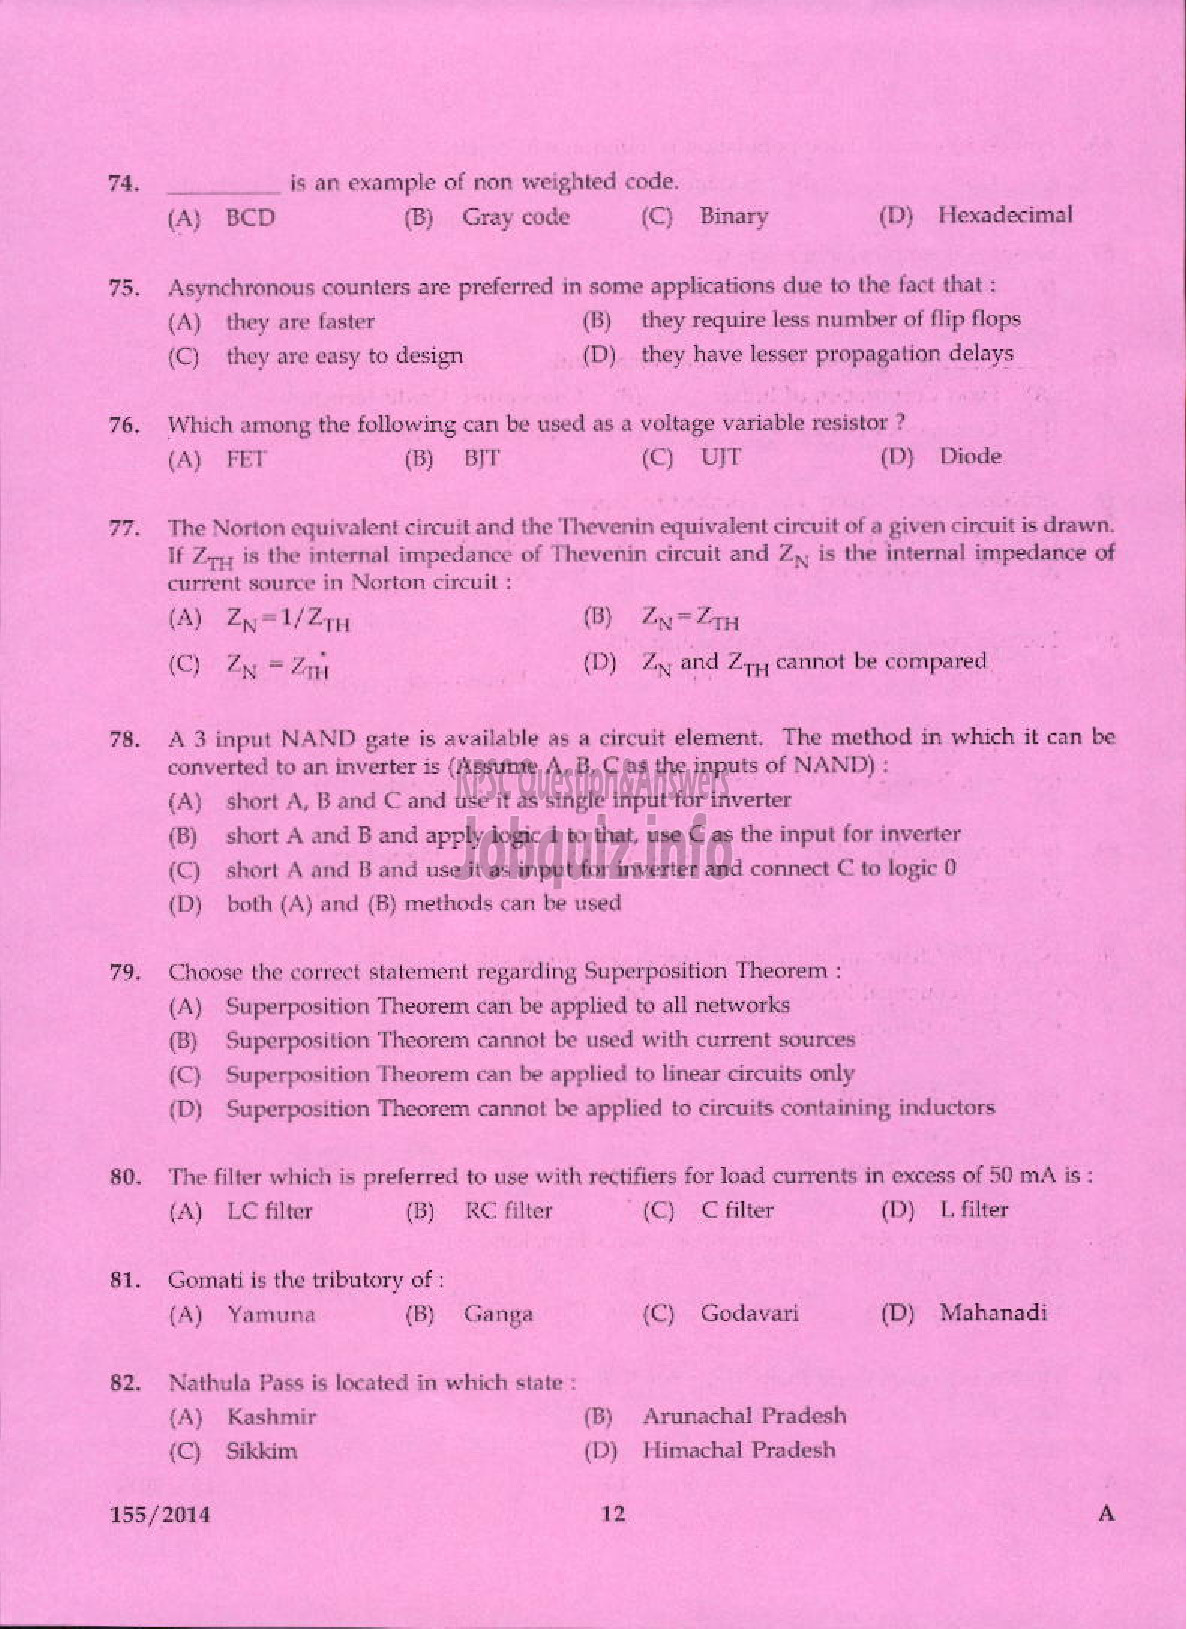 Kerala PSC Question Paper - INSTRUCTOR GR I ELECTRONICS ENGINEERING COLLEGES TECHNICAL EDUCATION-10